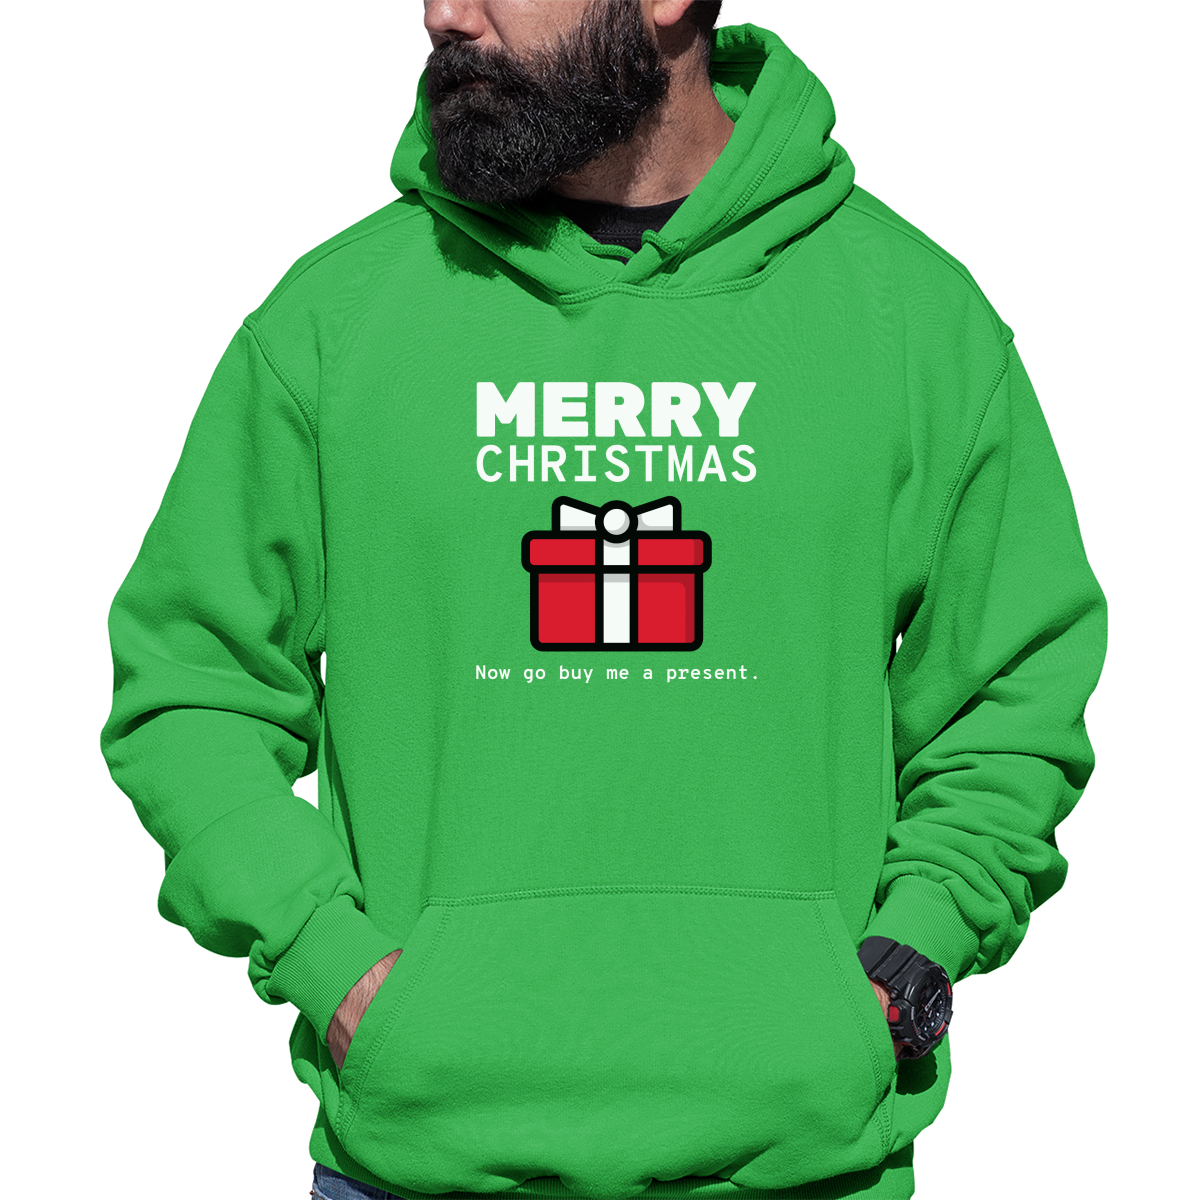 Merry Christmas Now Go Buy Me a Present Unisex Hoodie | Green